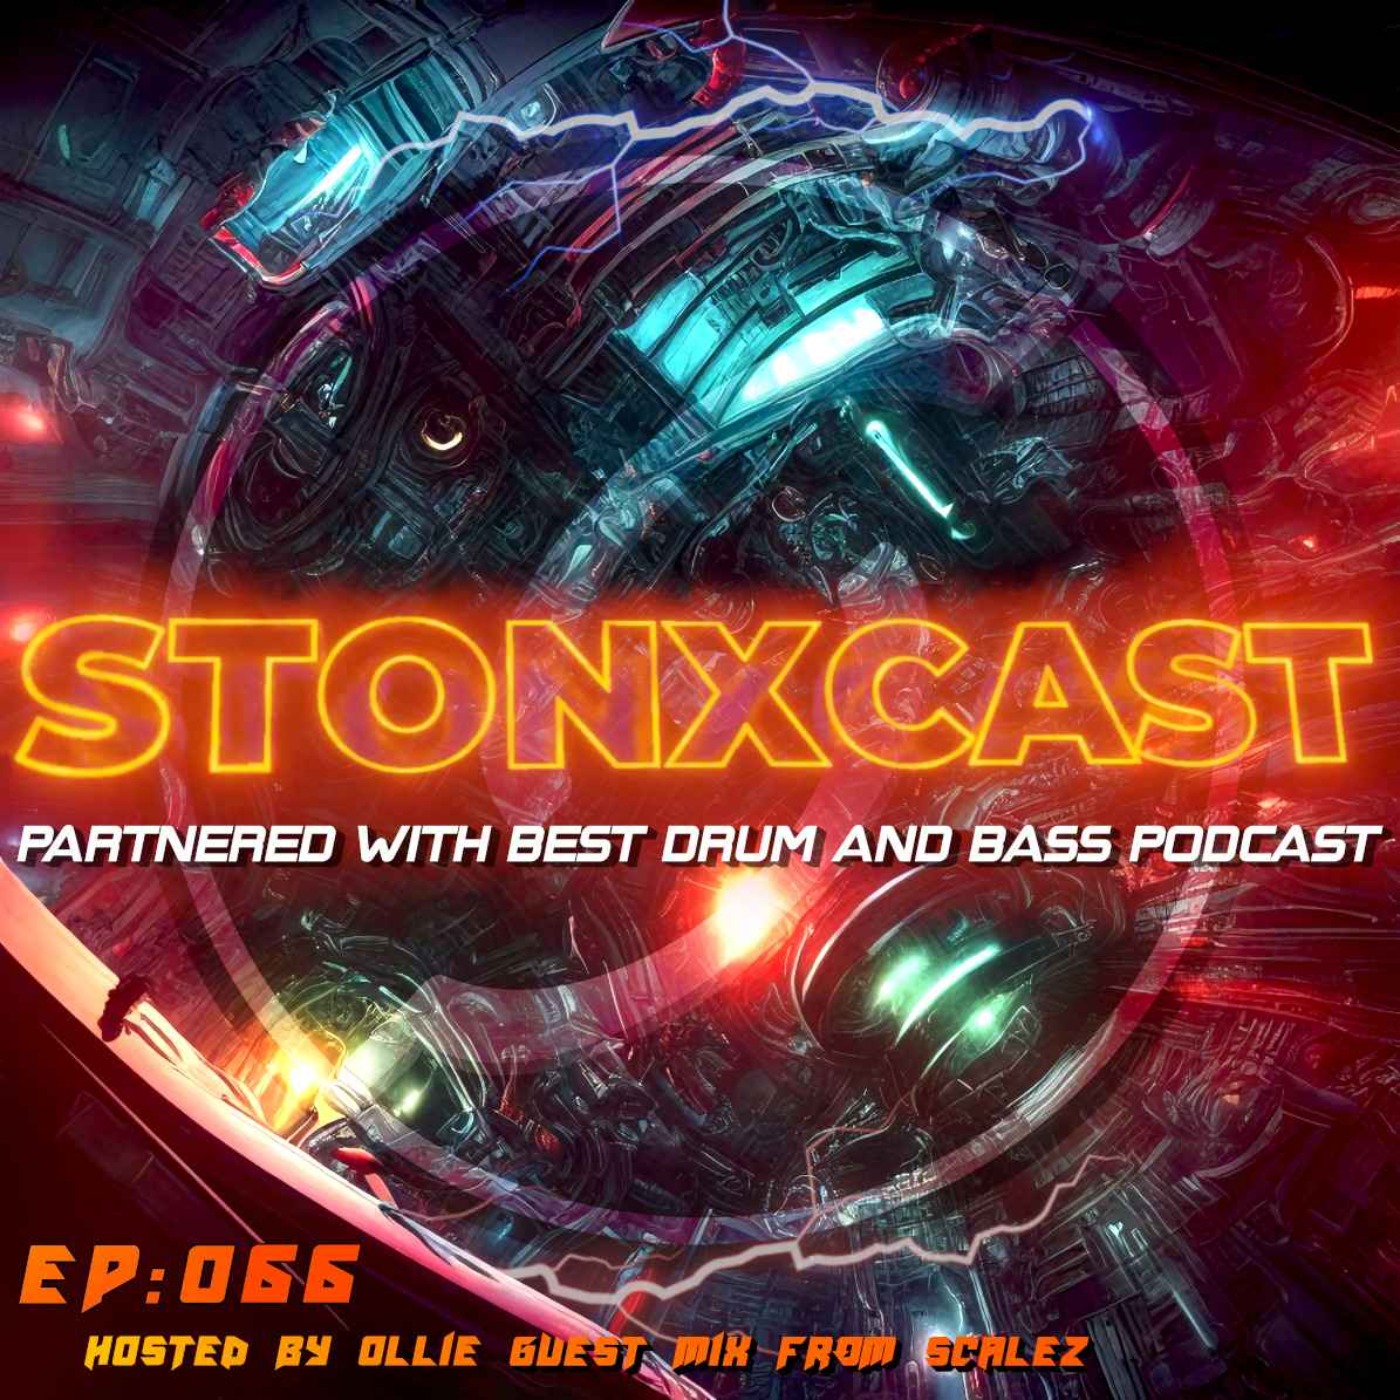 Stonxcast EP:066 - Hosted by Ollie , Guest Mix from Scalez Artwork